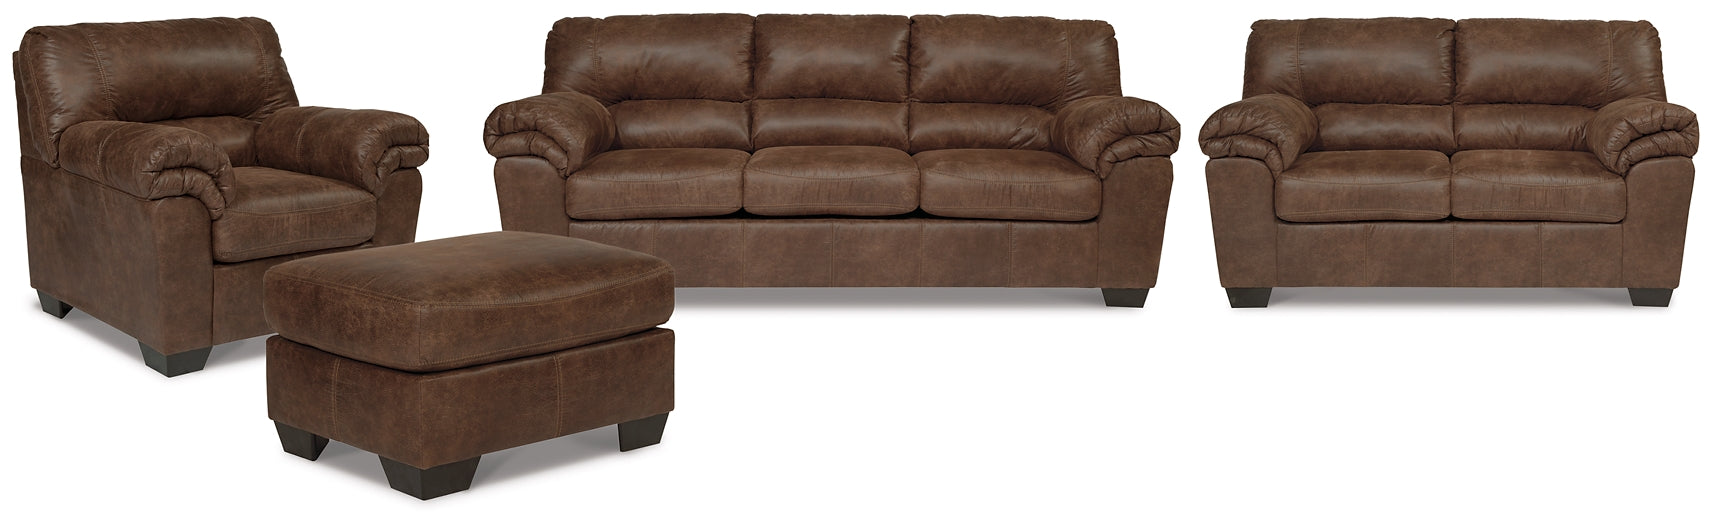 Bladen Sofa, Loveseat, Chair and Ottoman at Walker Mattress and Furniture Locations in Cedar Park and Belton TX.